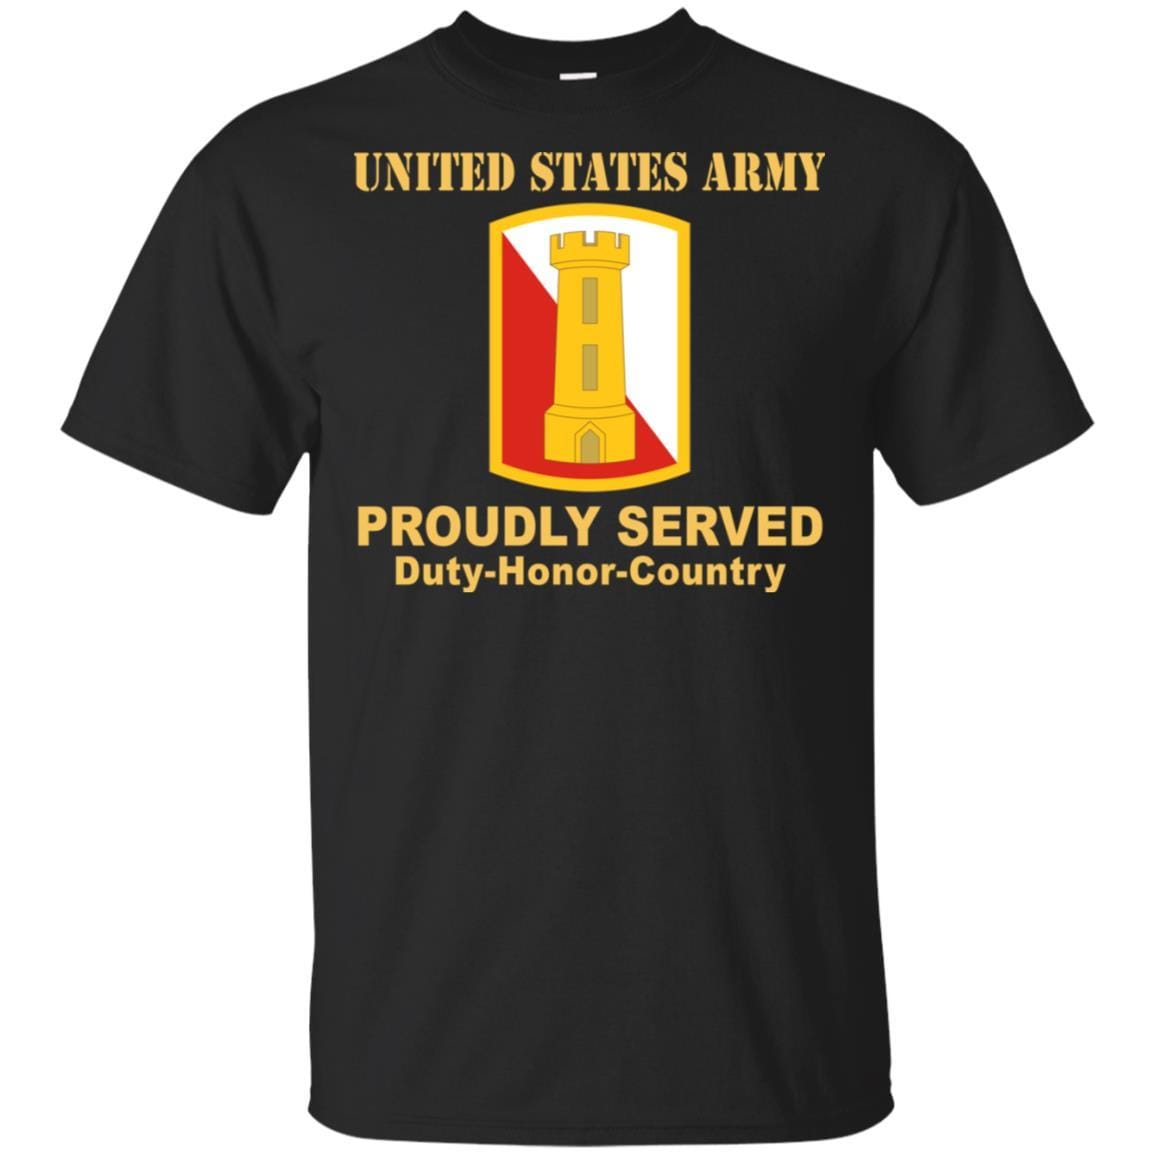 US ARMY 168TH ENGINEER BRIGADE- Proudly Served T-Shirt On Front For Men-TShirt-Army-Veterans Nation